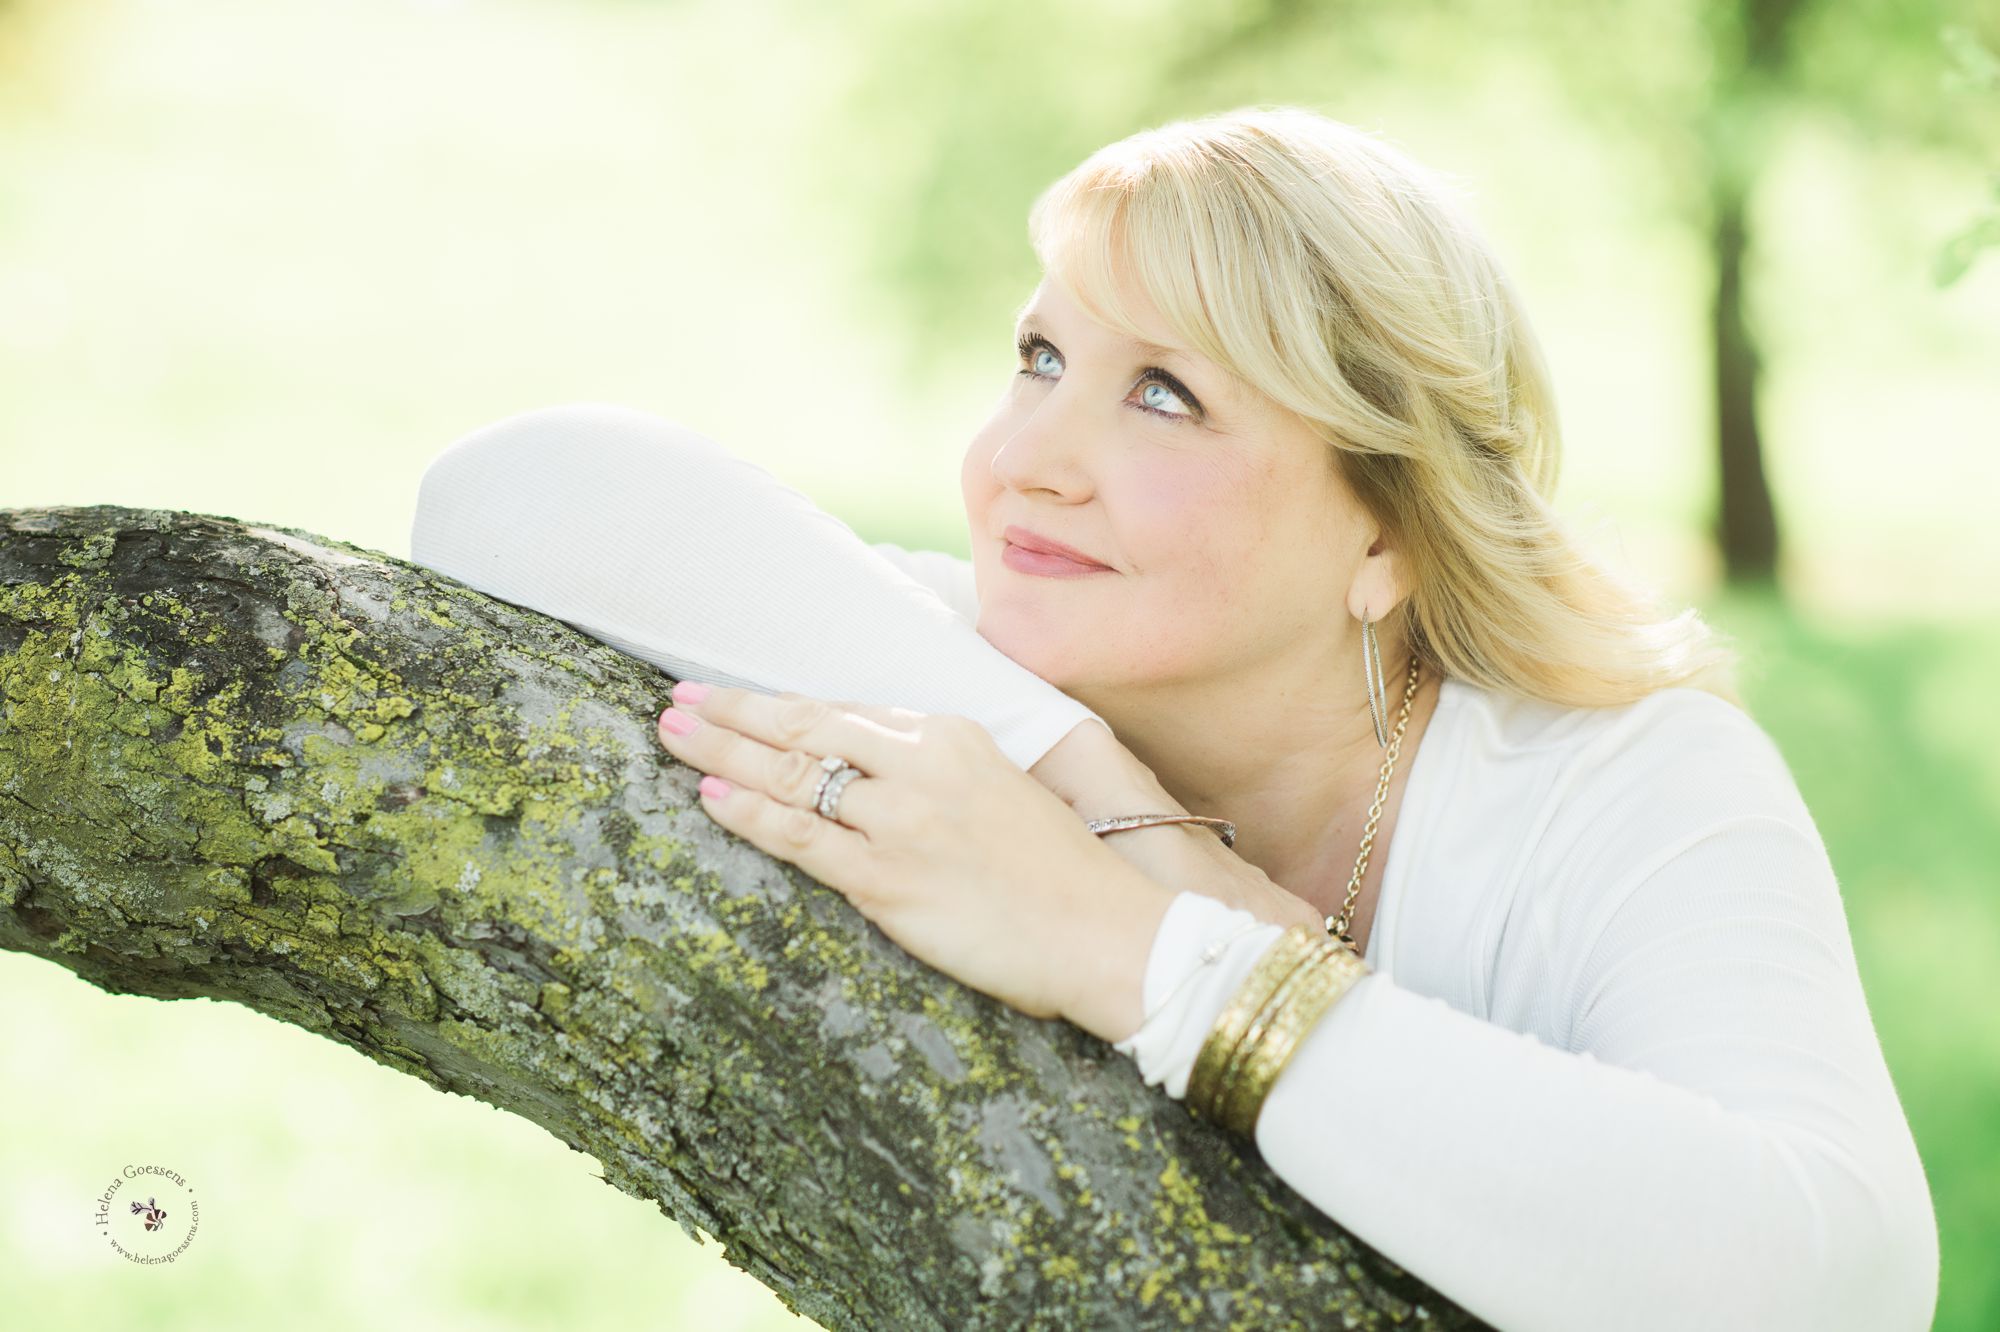 blond woman with blue eyes and white top on a tree branch